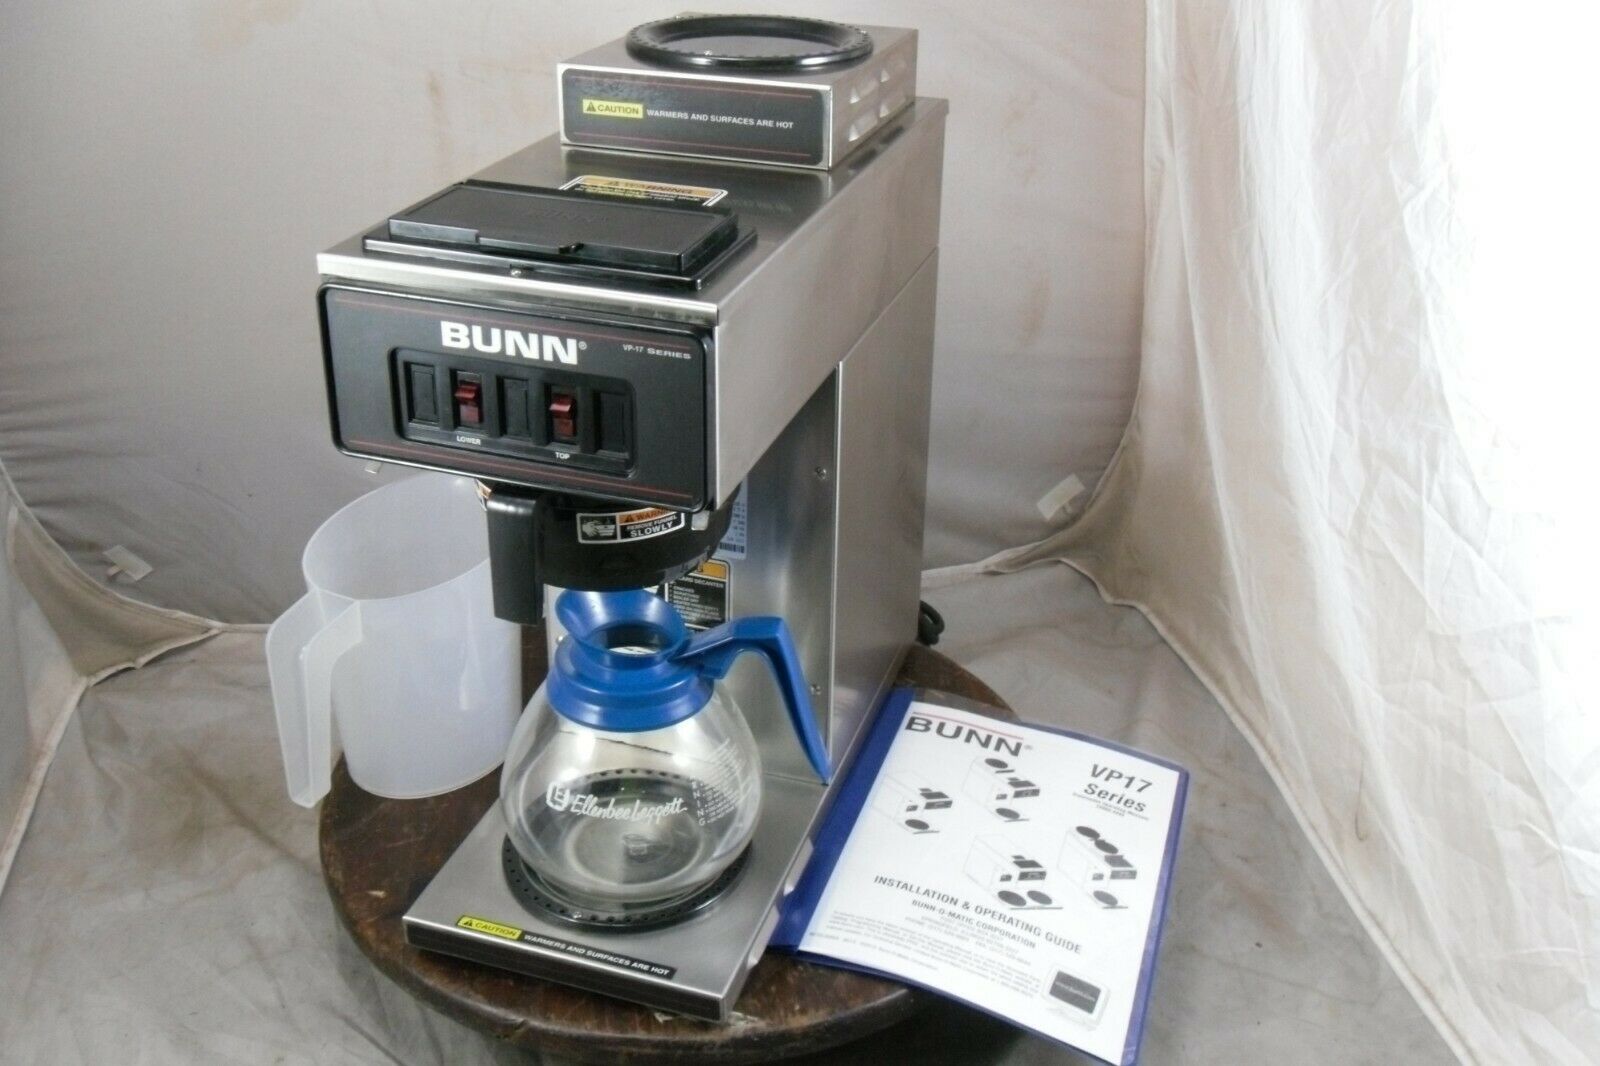 Bunn Vp17 12 Cup Pour Over Coffee Brewer Maker 13300.0002 Sn Vp17200324